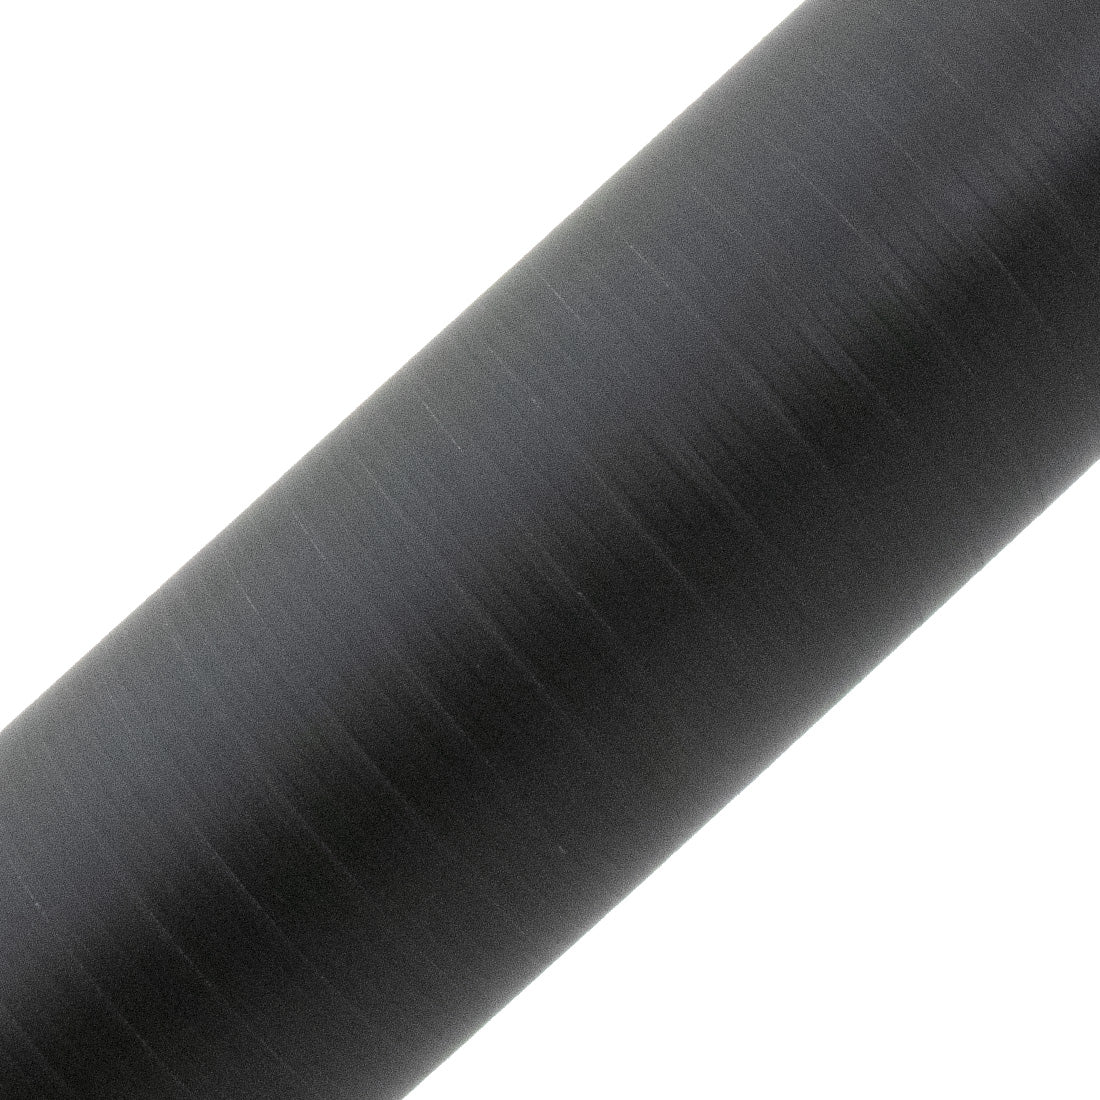 XERO Micro Basic Carbon Fiber Water Fed Pole Close Up View